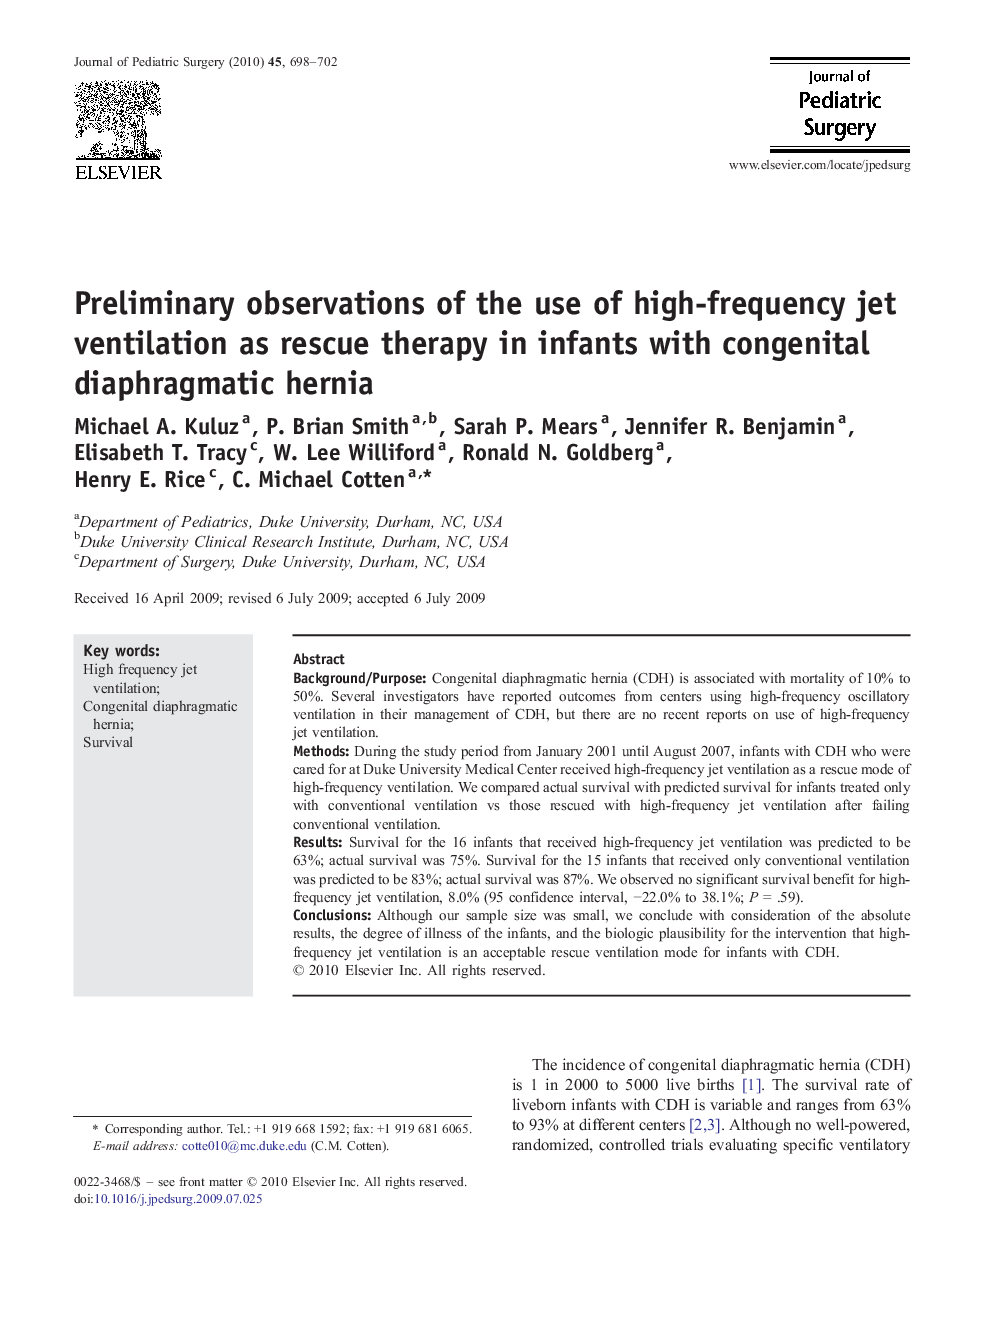 Preliminary observations of the use of high-frequency jet ventilation as rescue therapy in infants with congenital diaphragmatic hernia